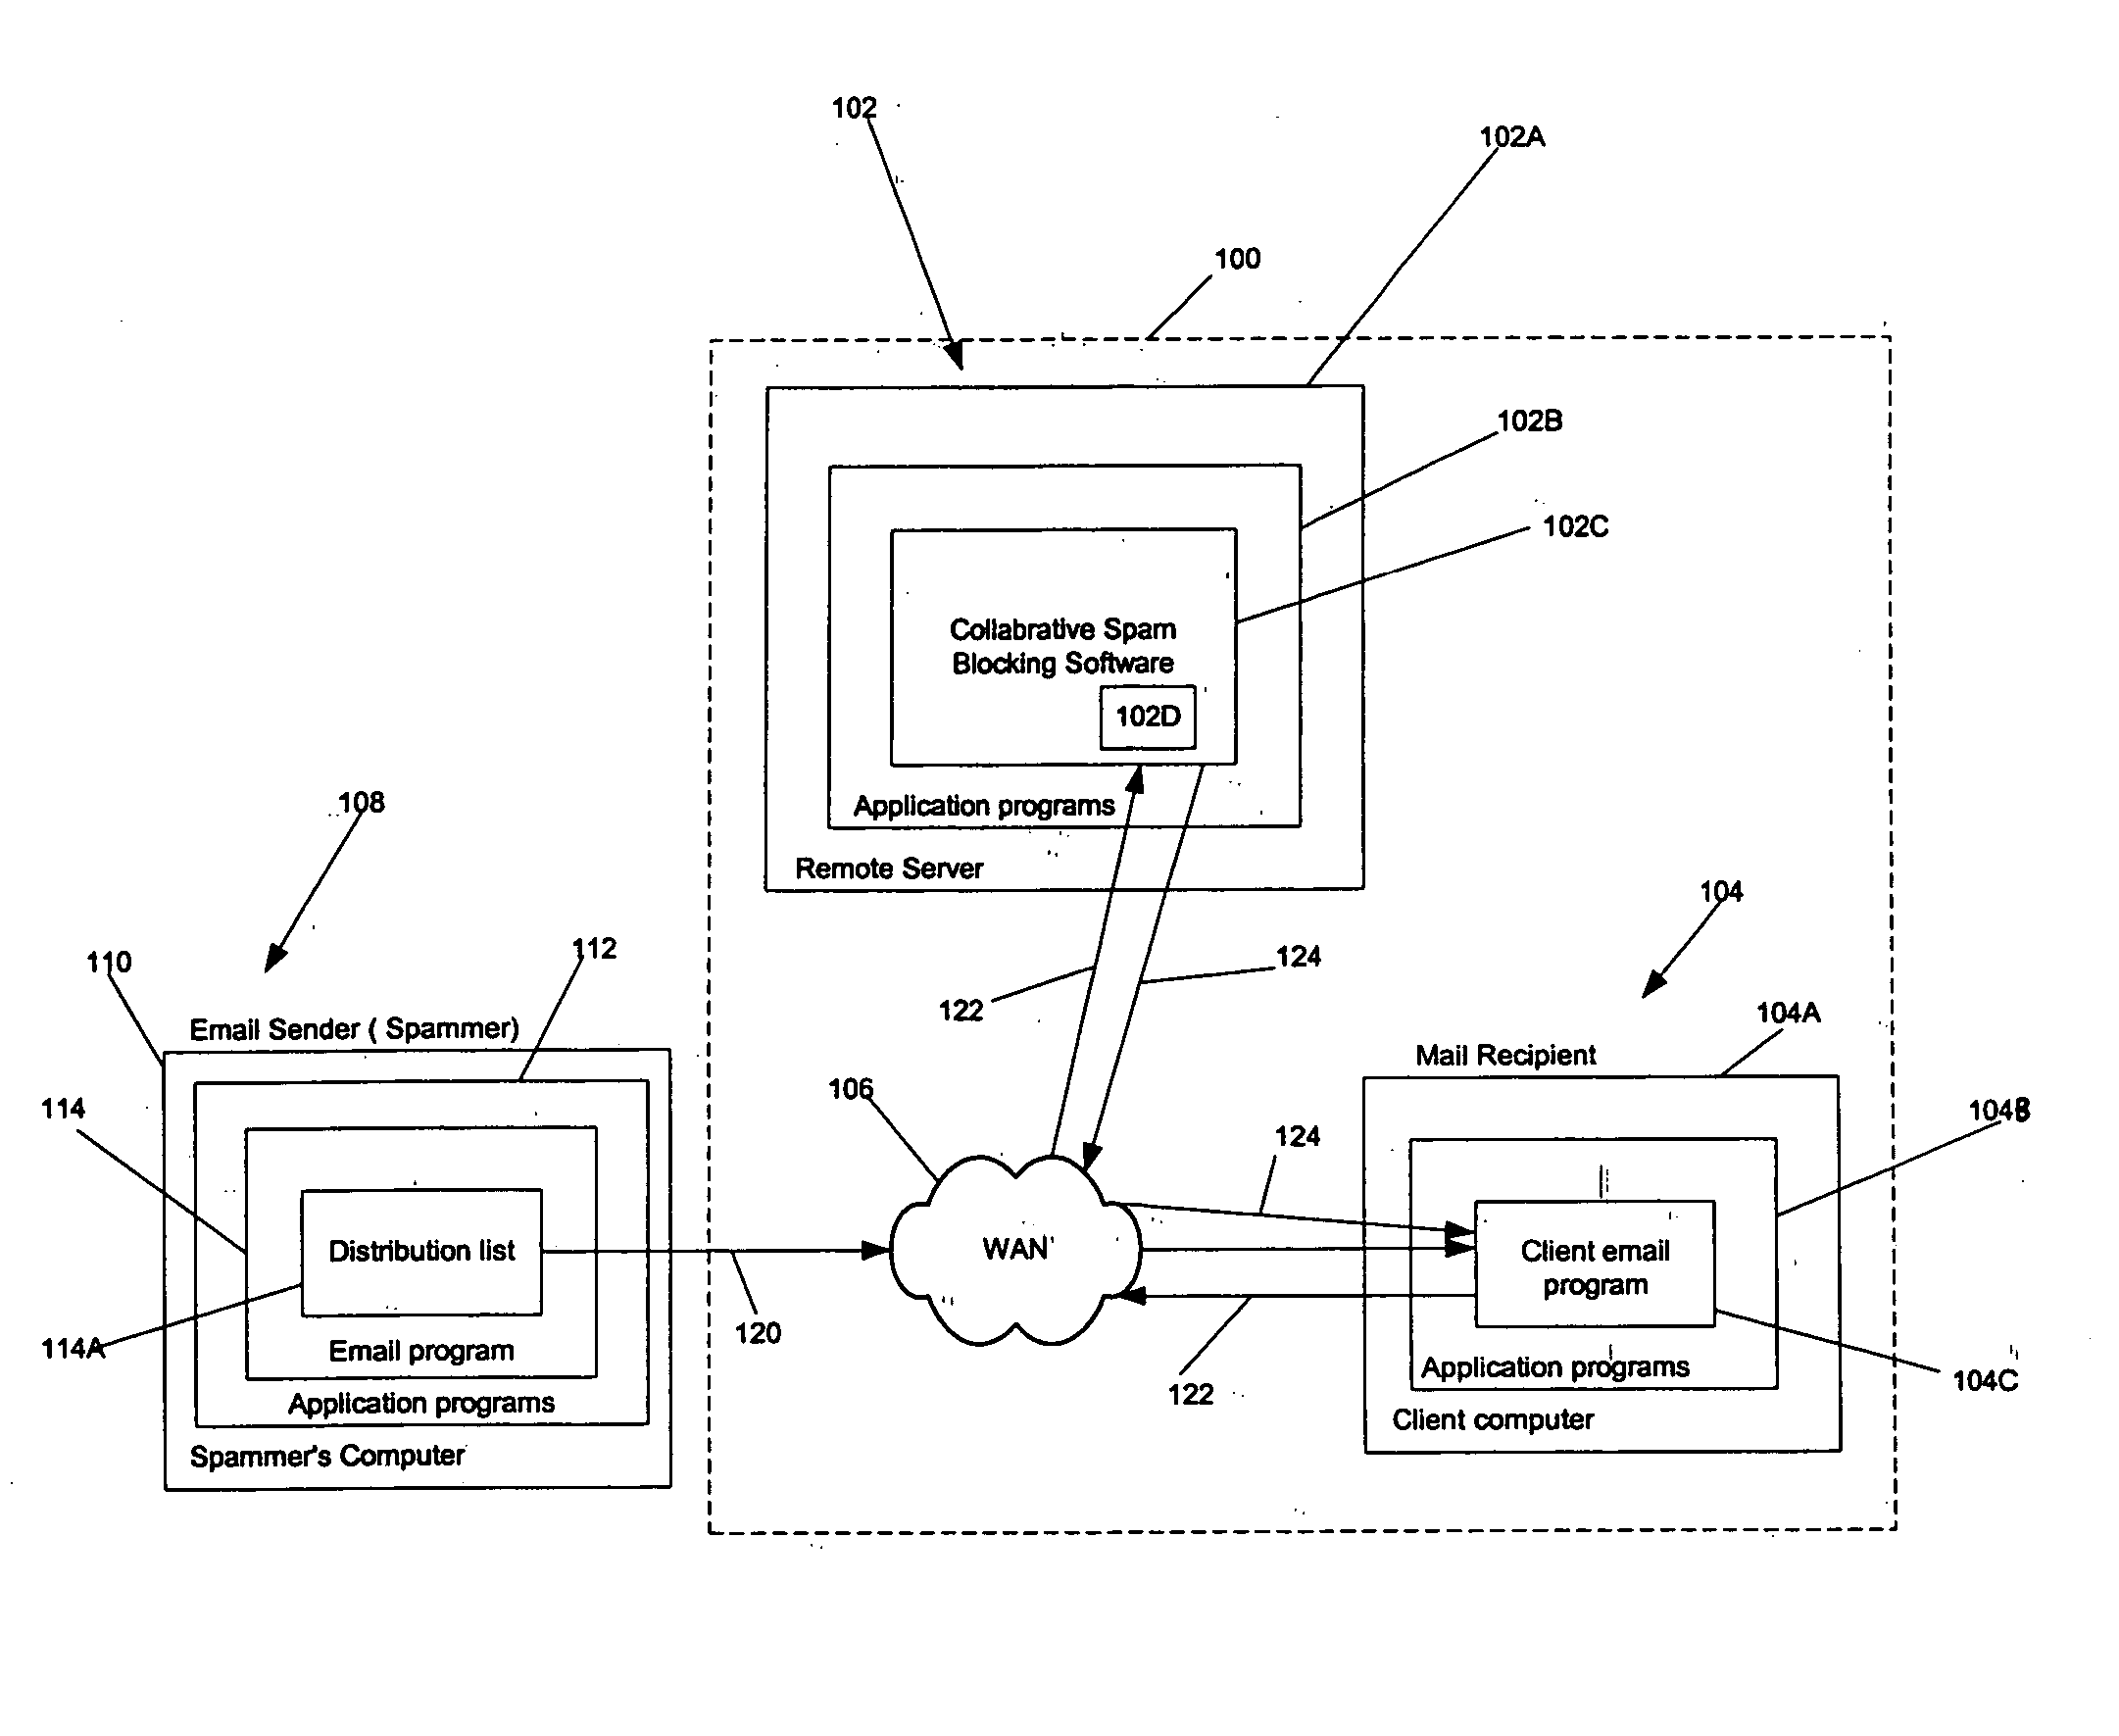 Method and apparatus to block spam based on spam reports from a community of users